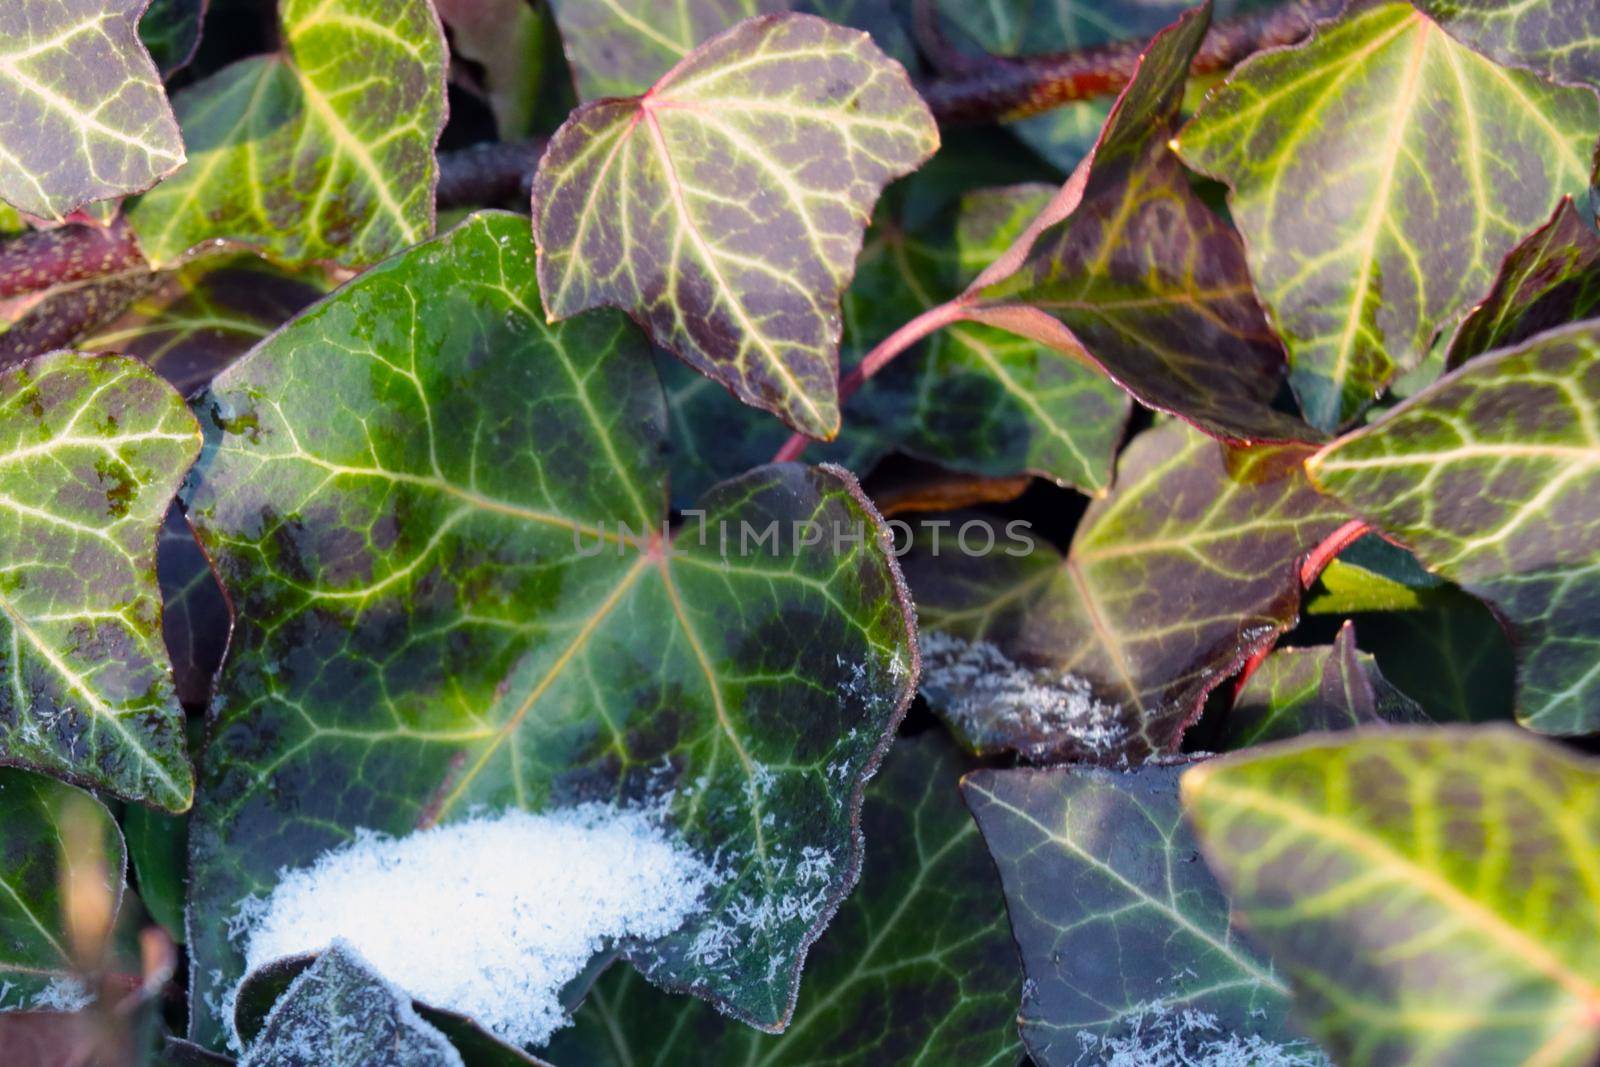 On the green leaves of the bushes lies snow and frost